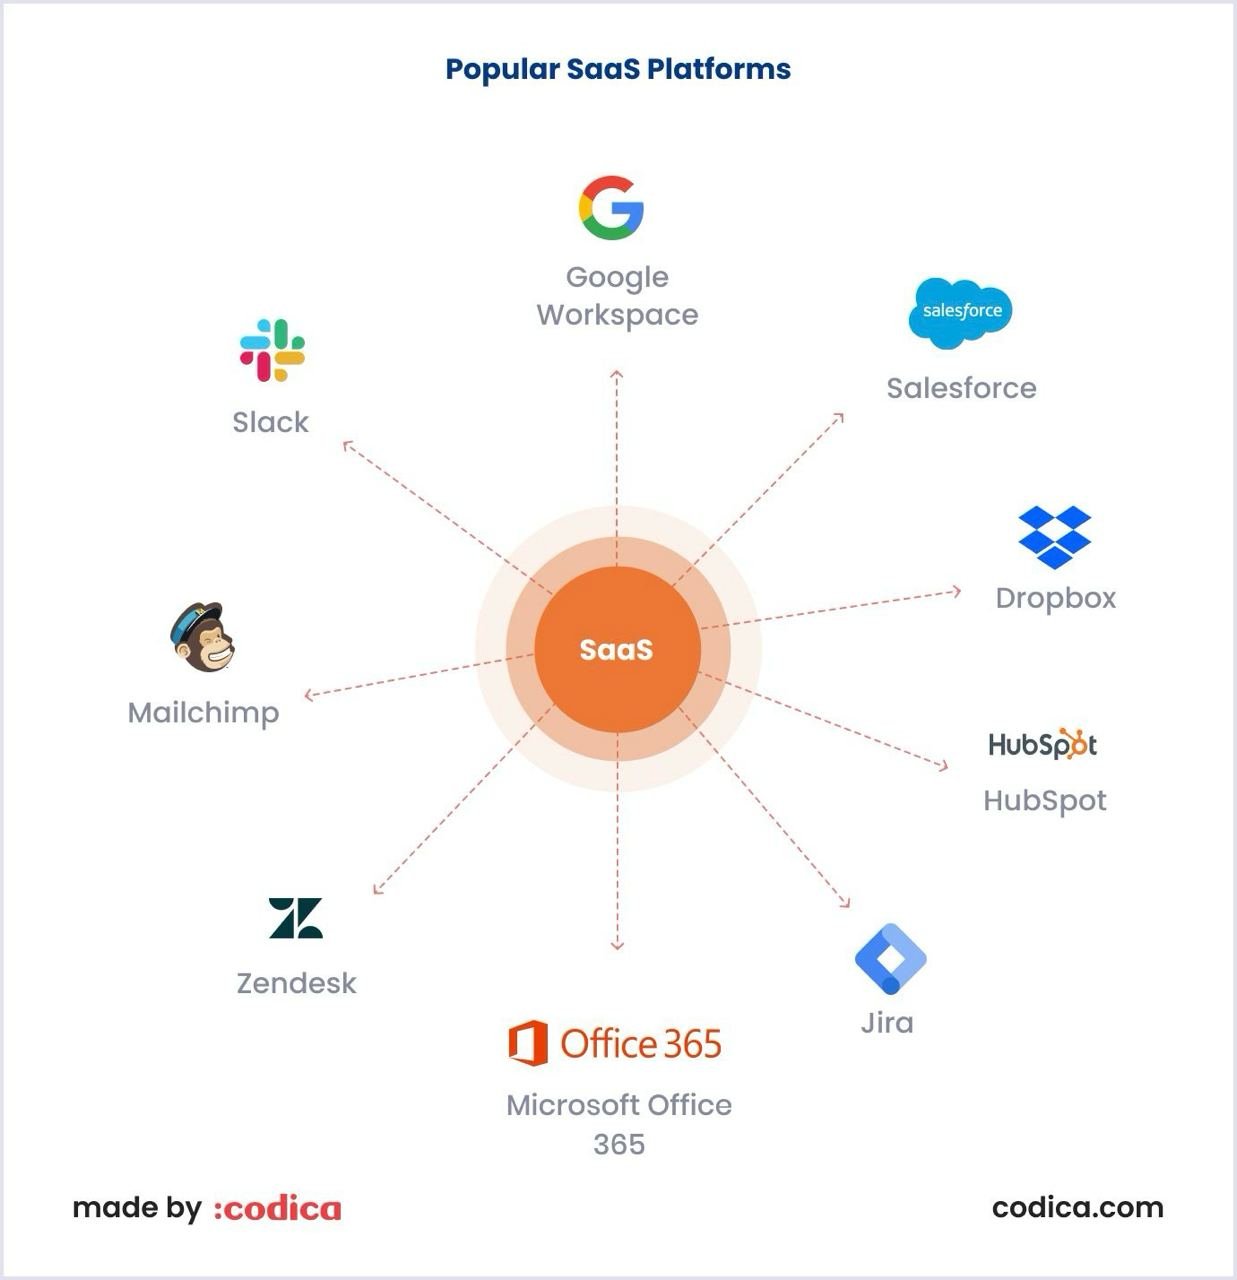 Most popular SaaS apps